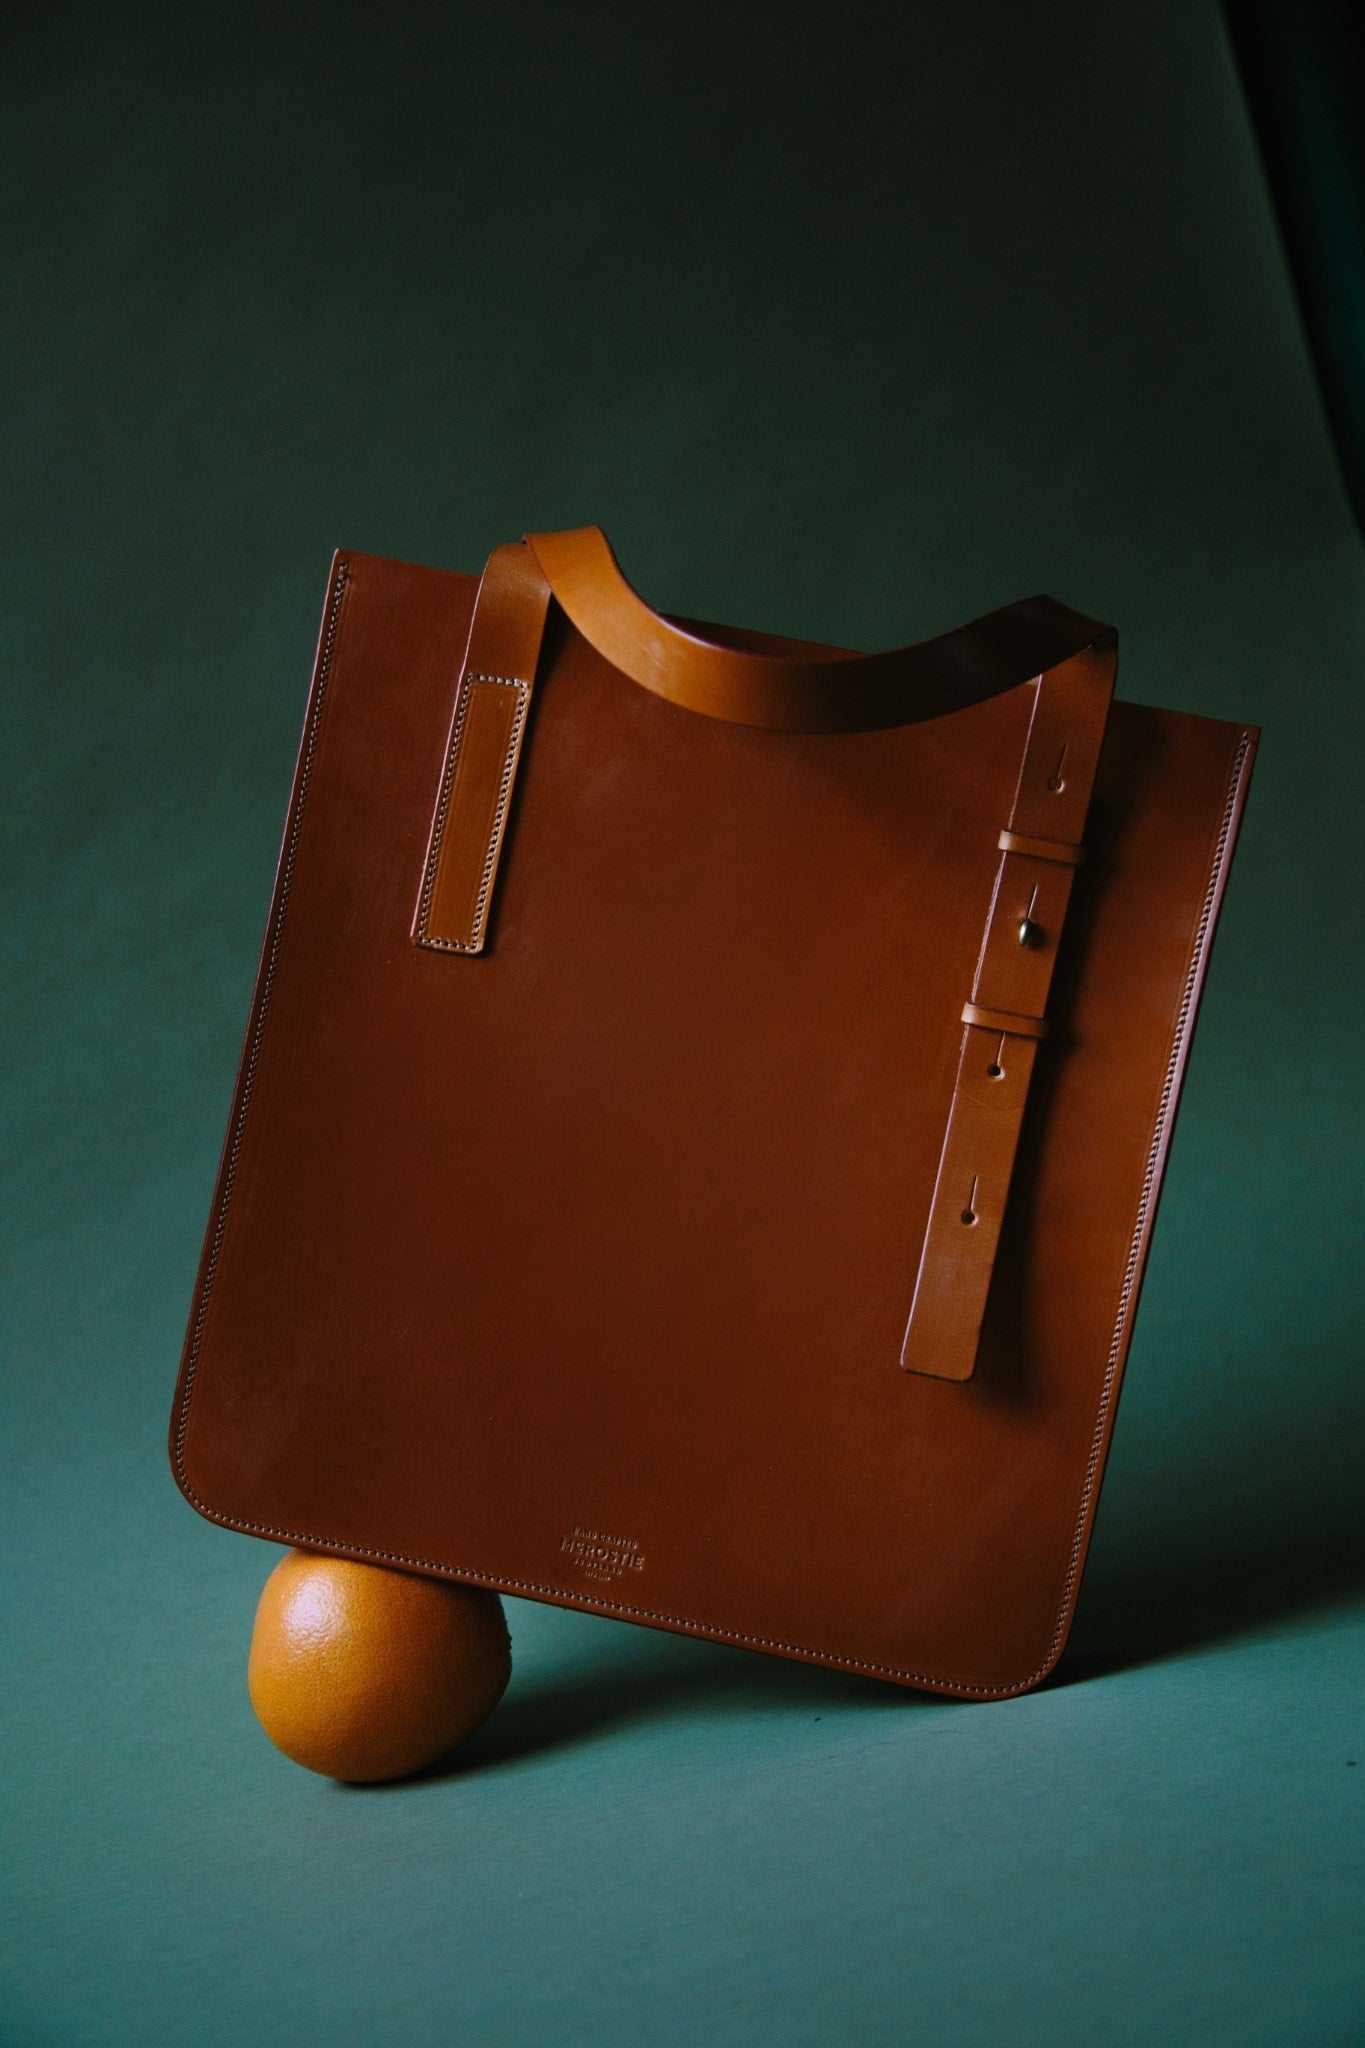 A large tan leather tote, balanced on an orange. The leather handle is illuminated in natural light.